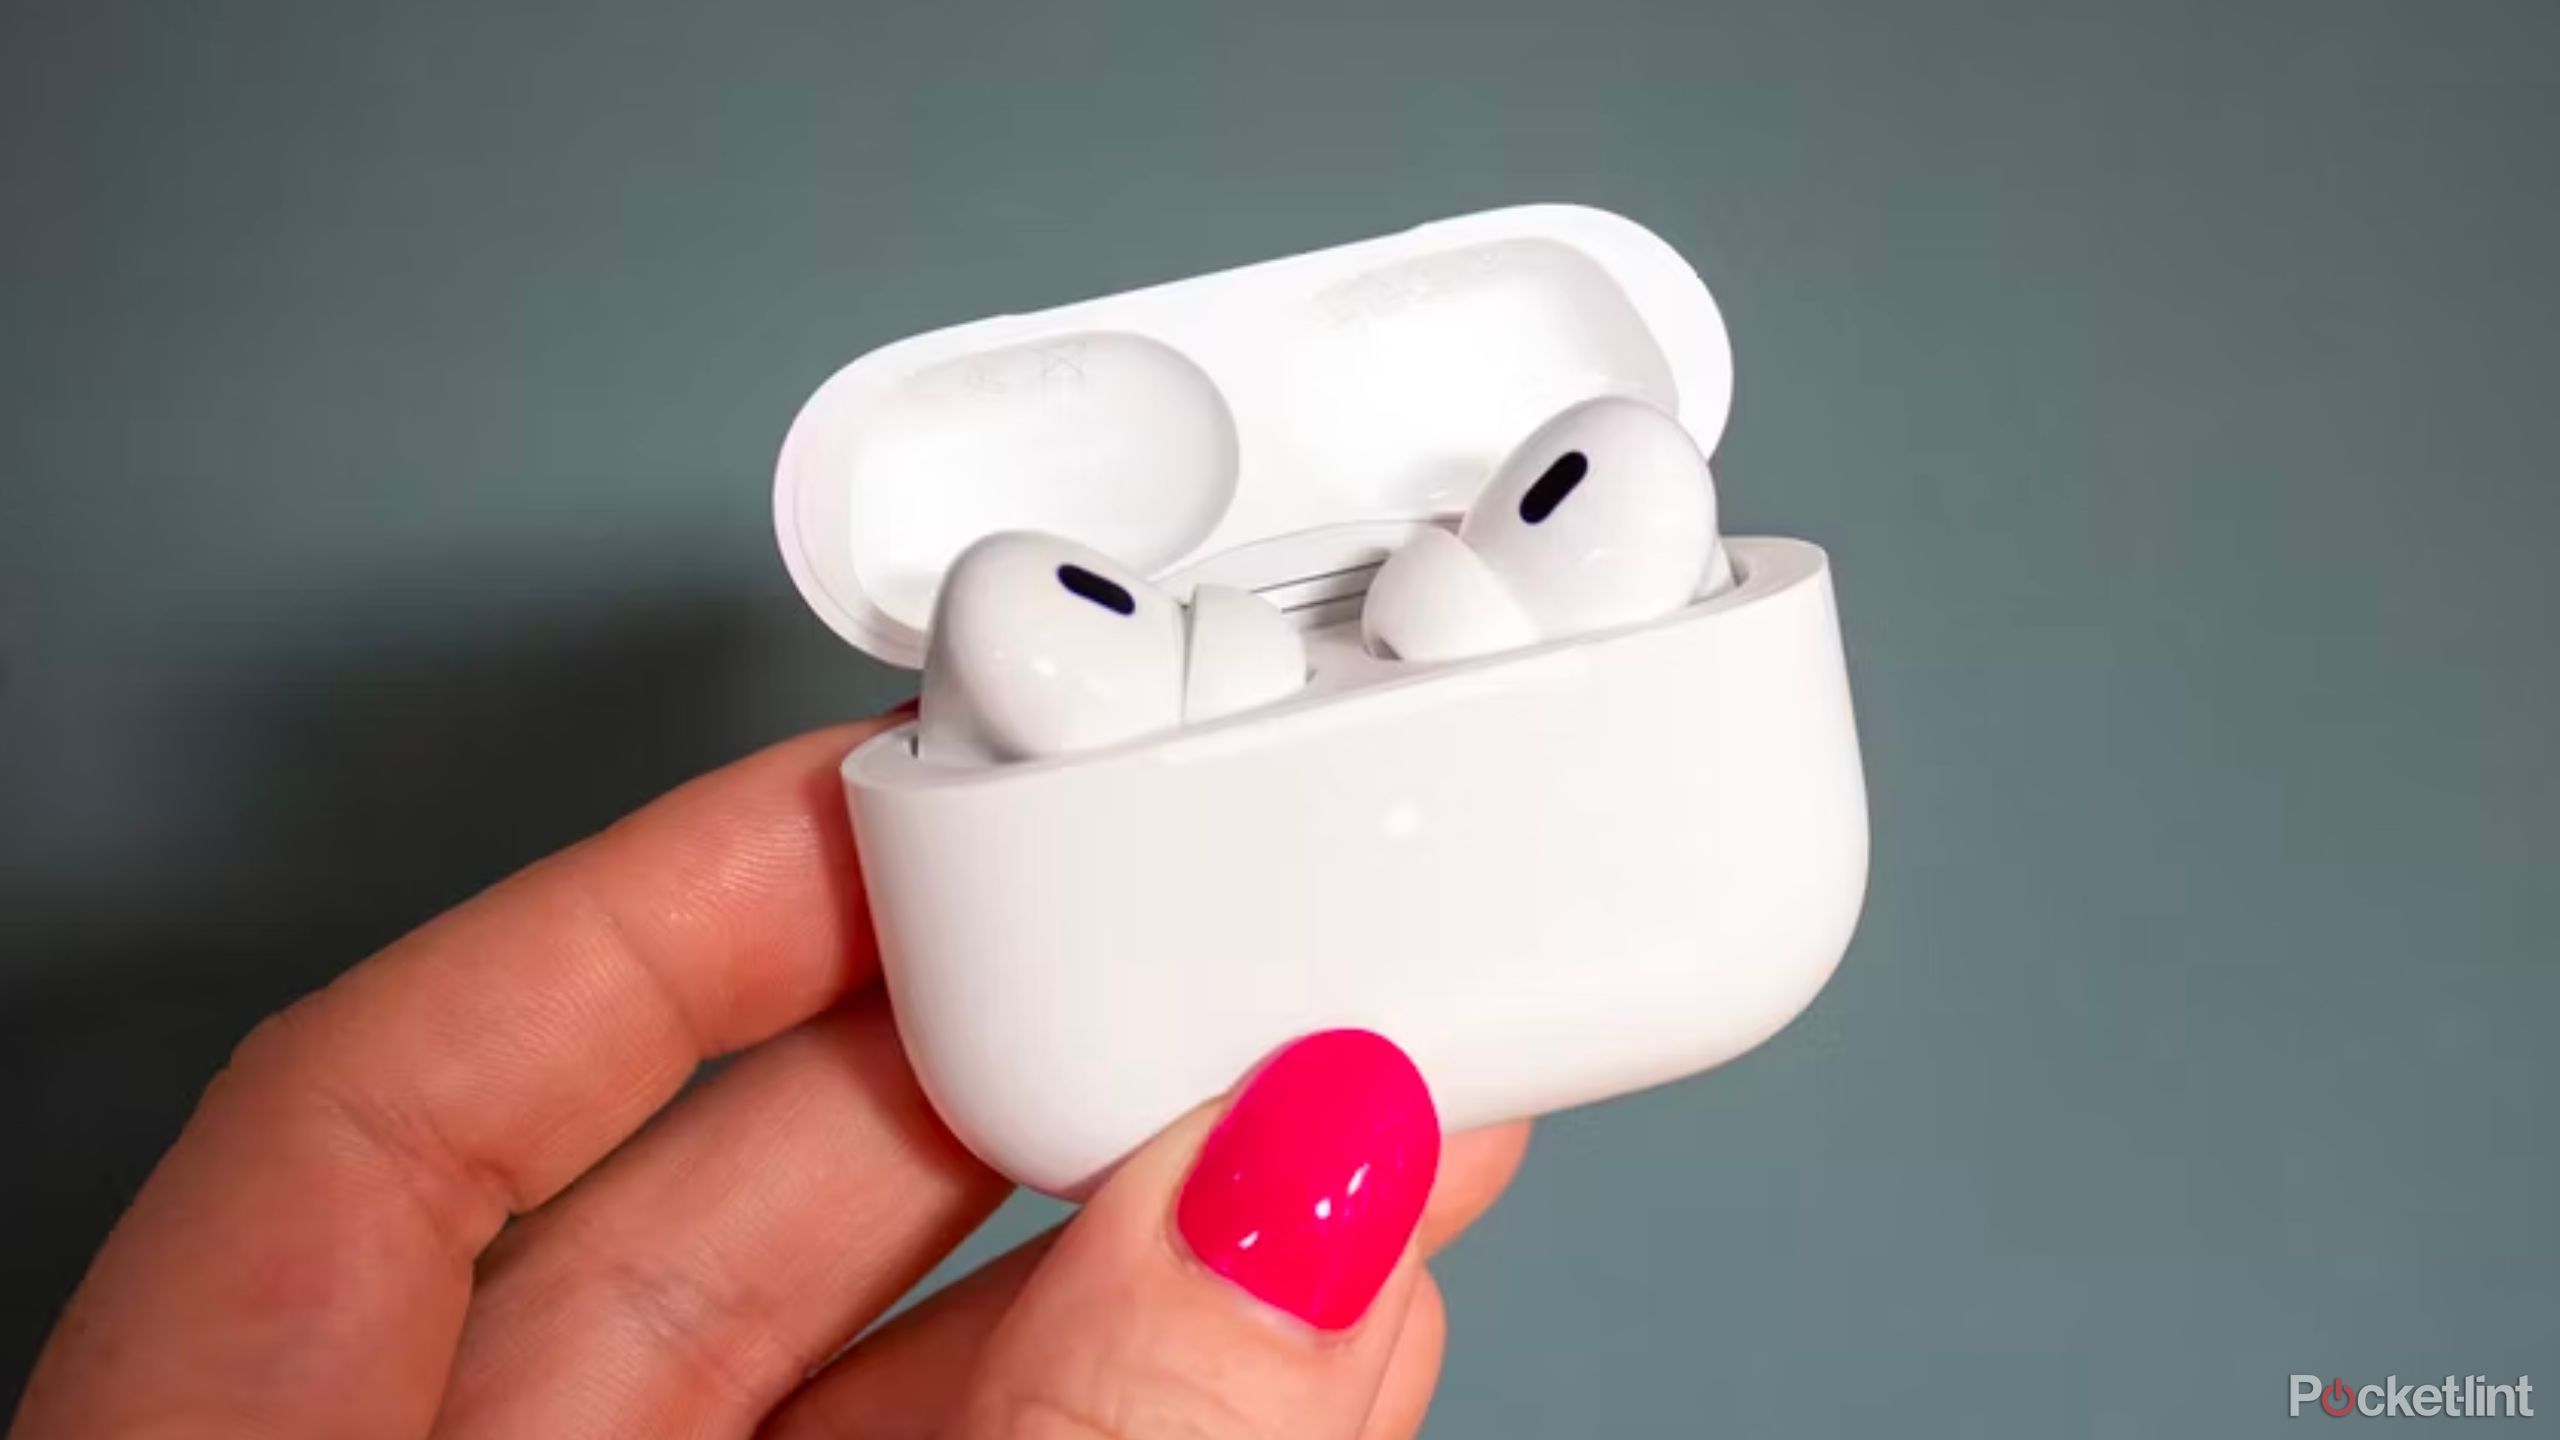 AirPods being held